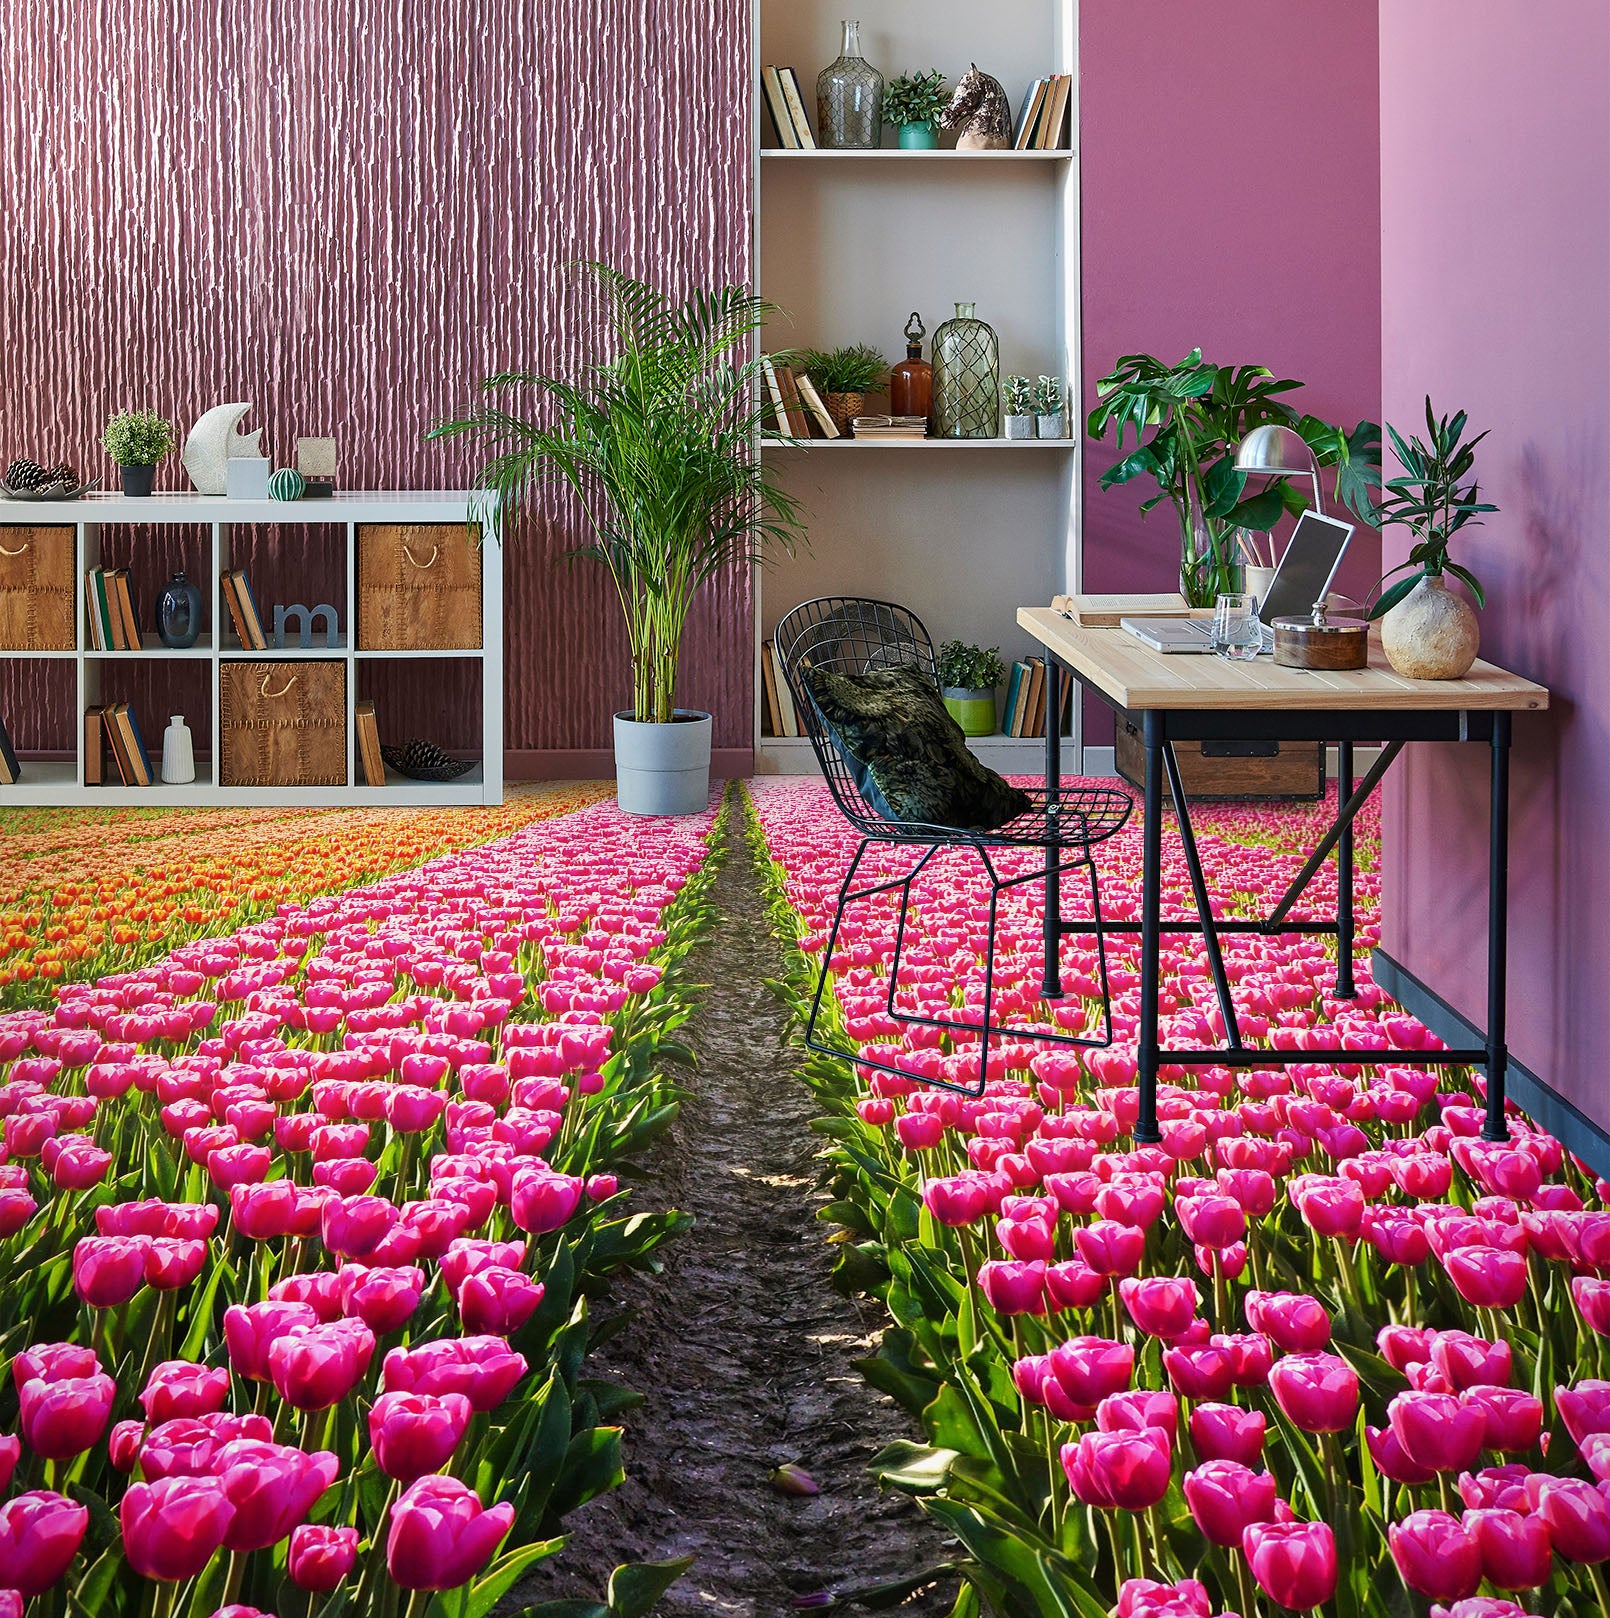 3D Full-bodied Tulips 1212 Floor Mural  Wallpaper Murals Self-Adhesive Removable Print Epoxy